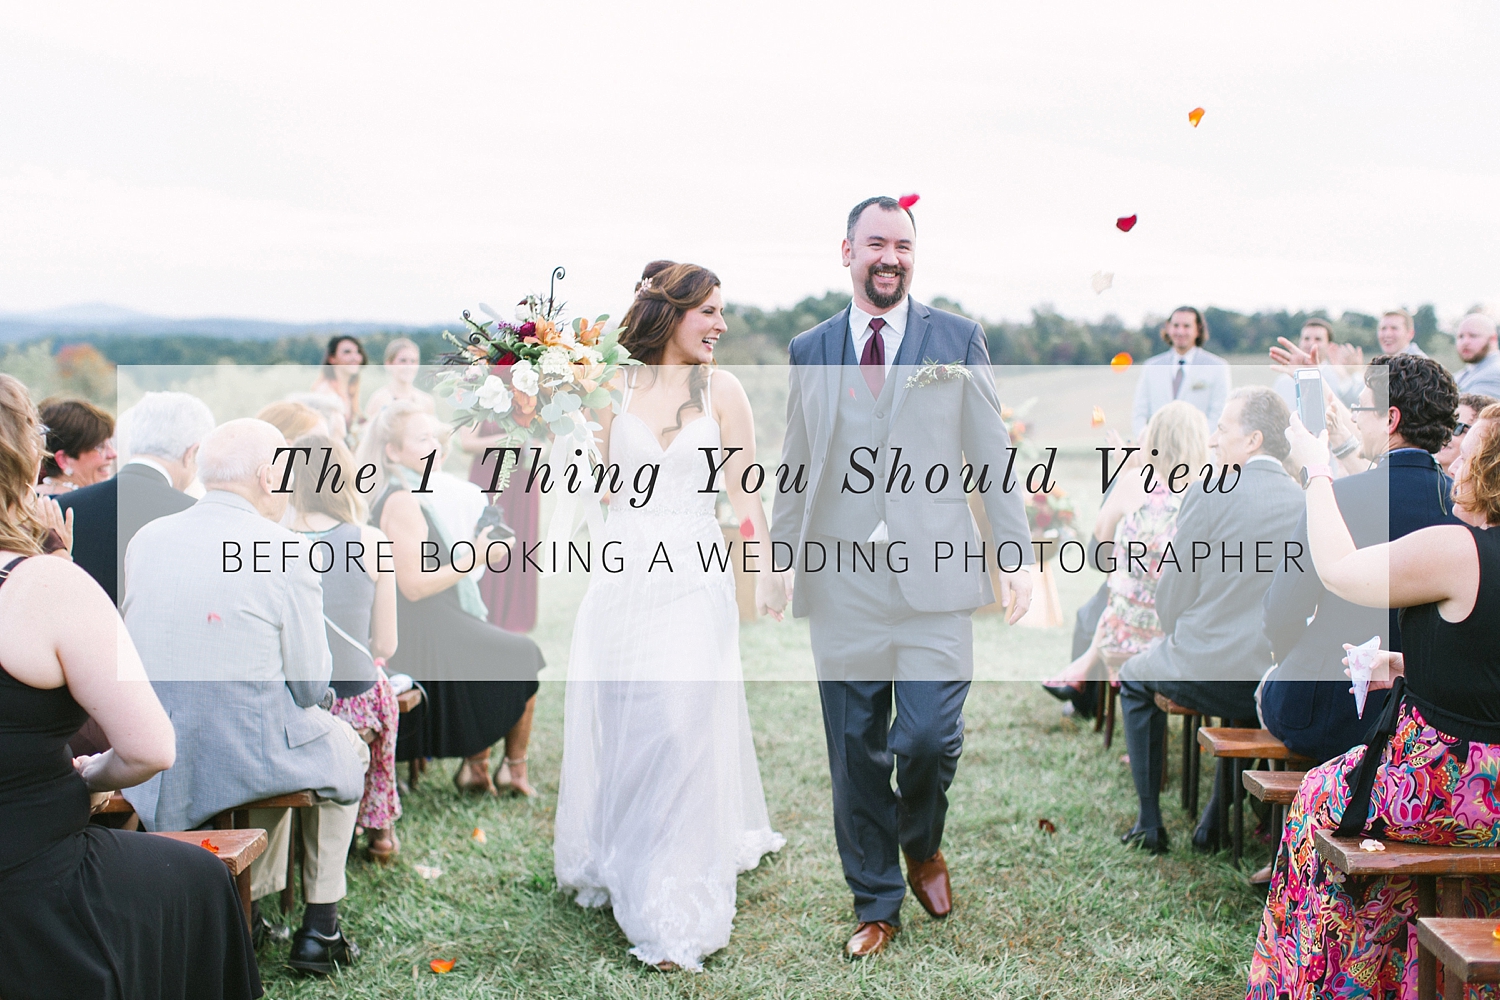 The ONE thing you should view before booking a wedding photographer